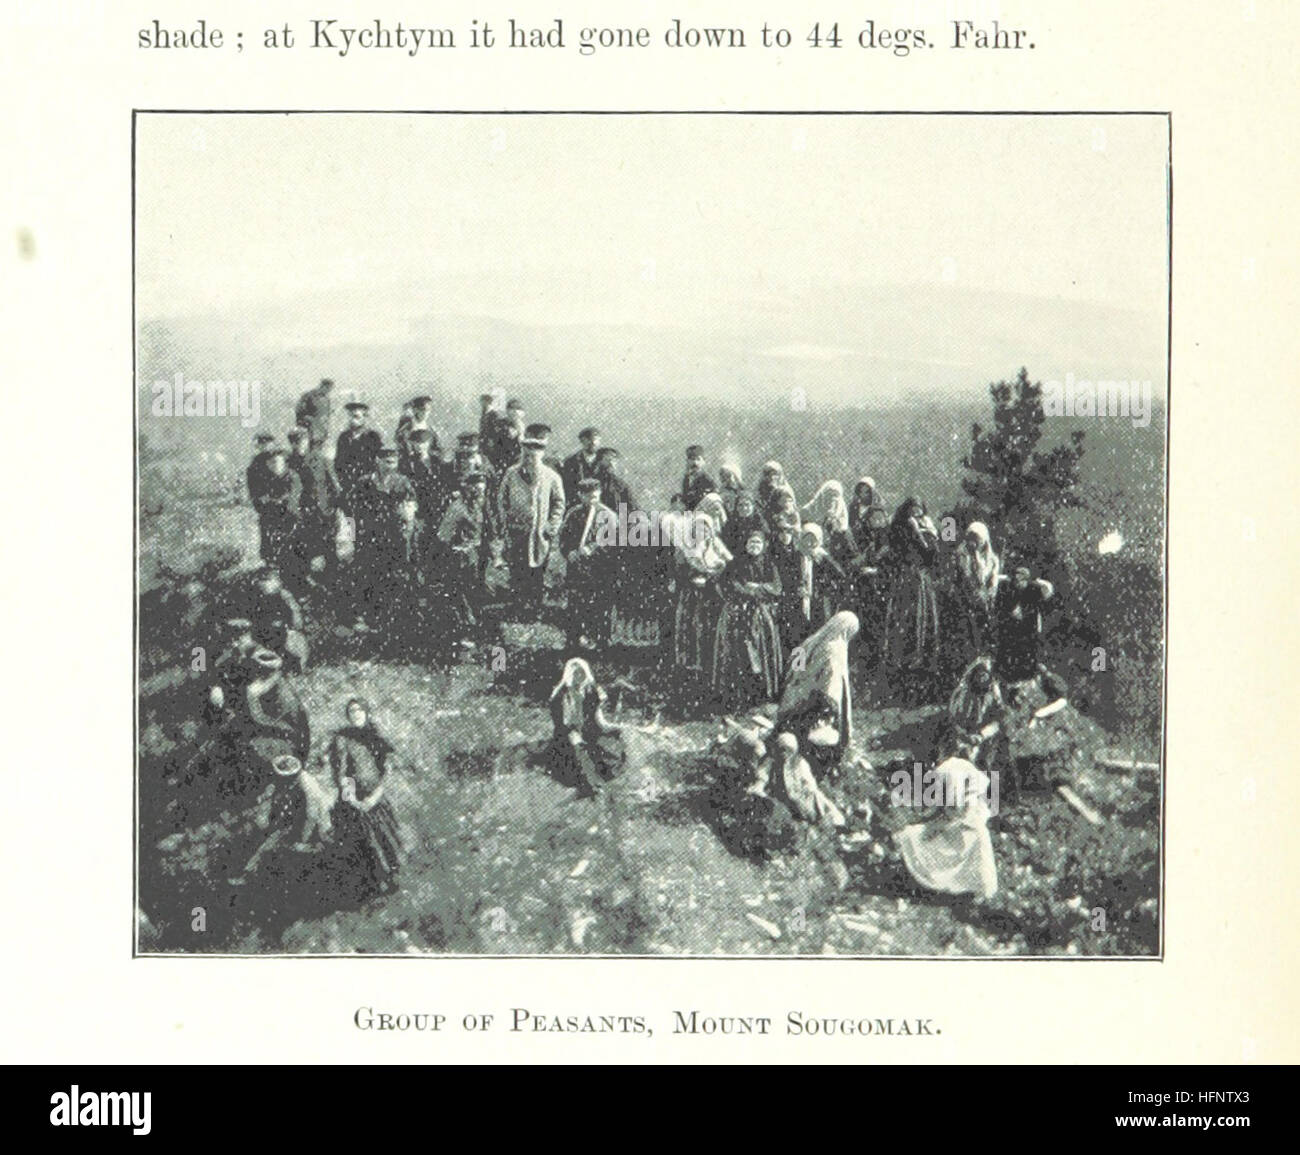 Reminiscences of Russia. The Ural Mountains and adjoining Siberian district in 1897 Image taken from page 60 of 'Reminiscences of Russia The Stock Photo